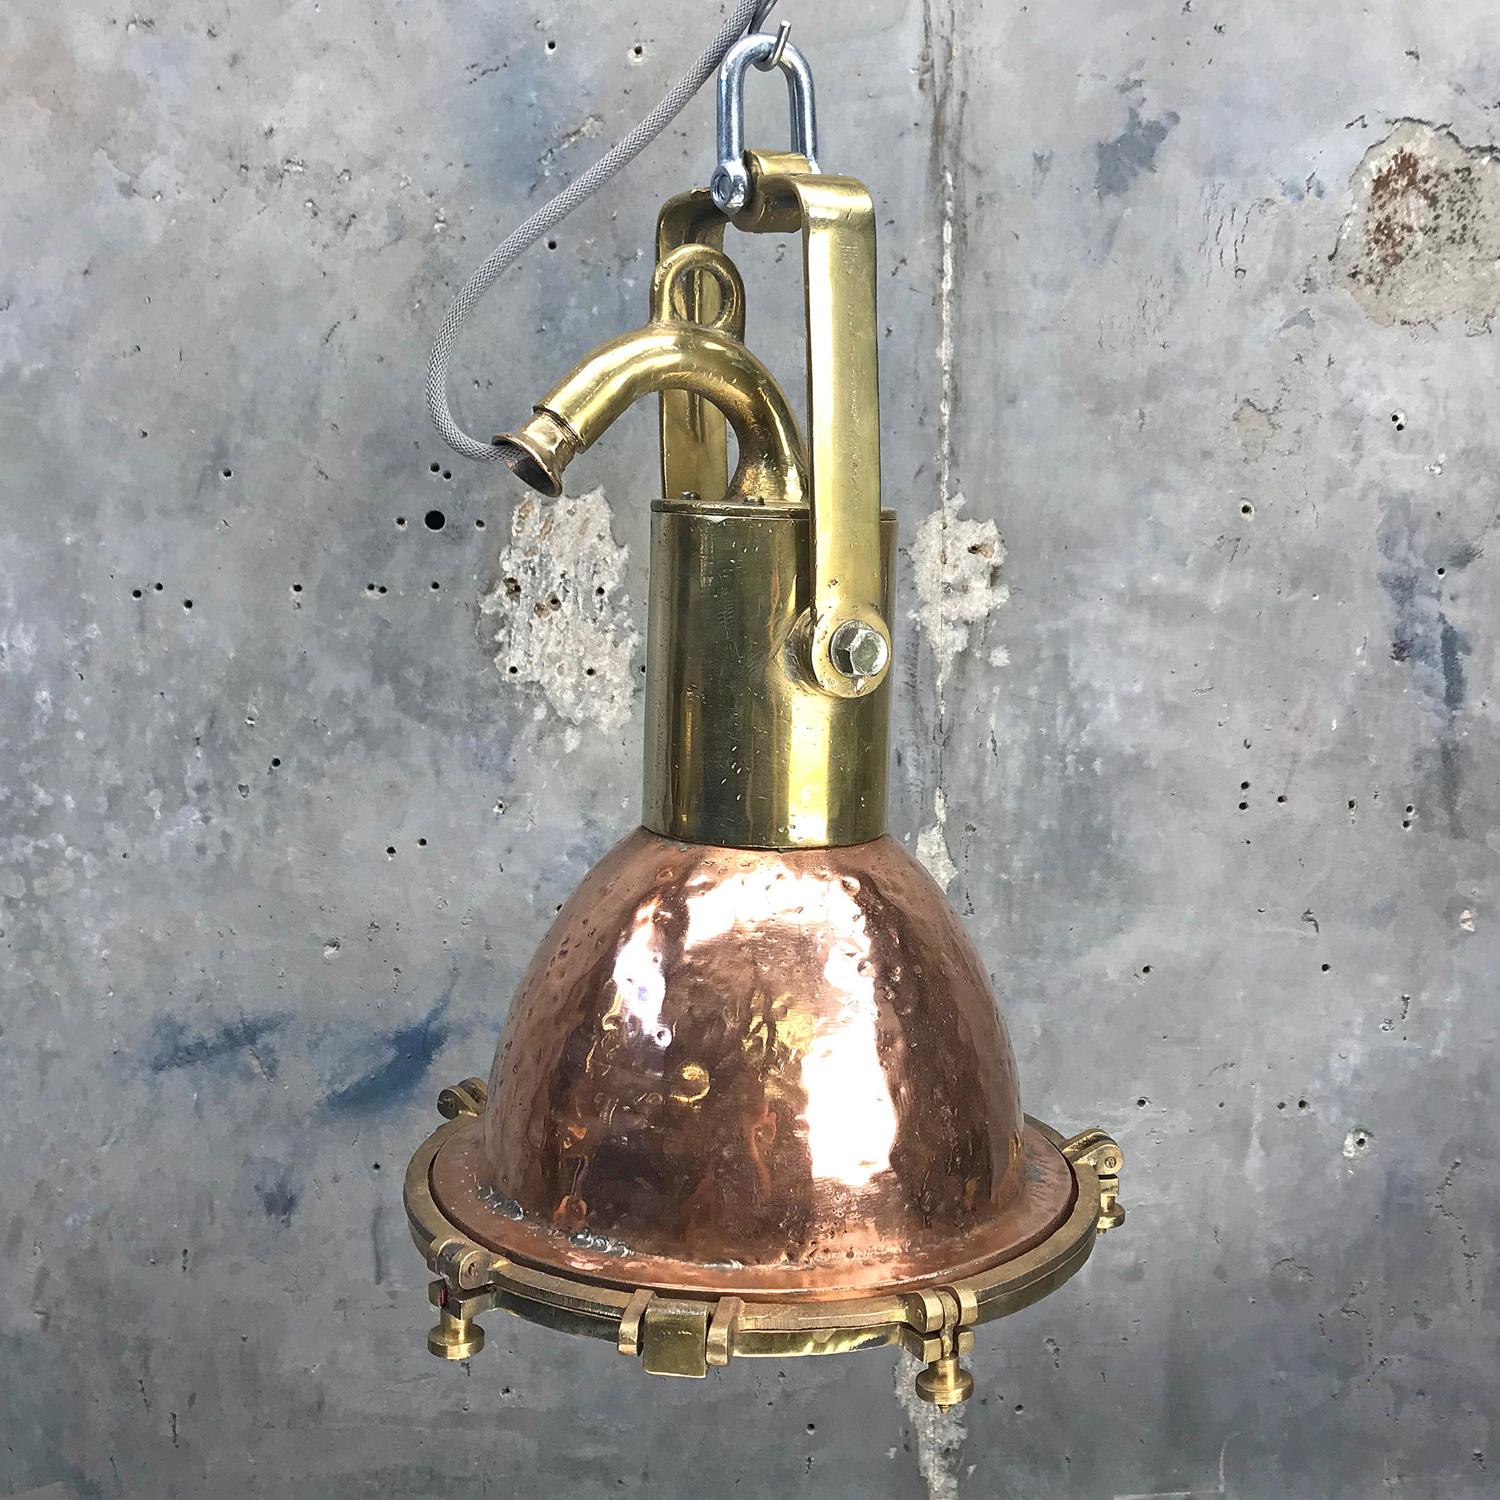 A beautifully aged cargo ships copper and brass pendant lamp restored and ready for installation.

These lights were made in the 1960s in Germany and used to light cargo bays of sea going vessels travelling across the globe.

The main dome is